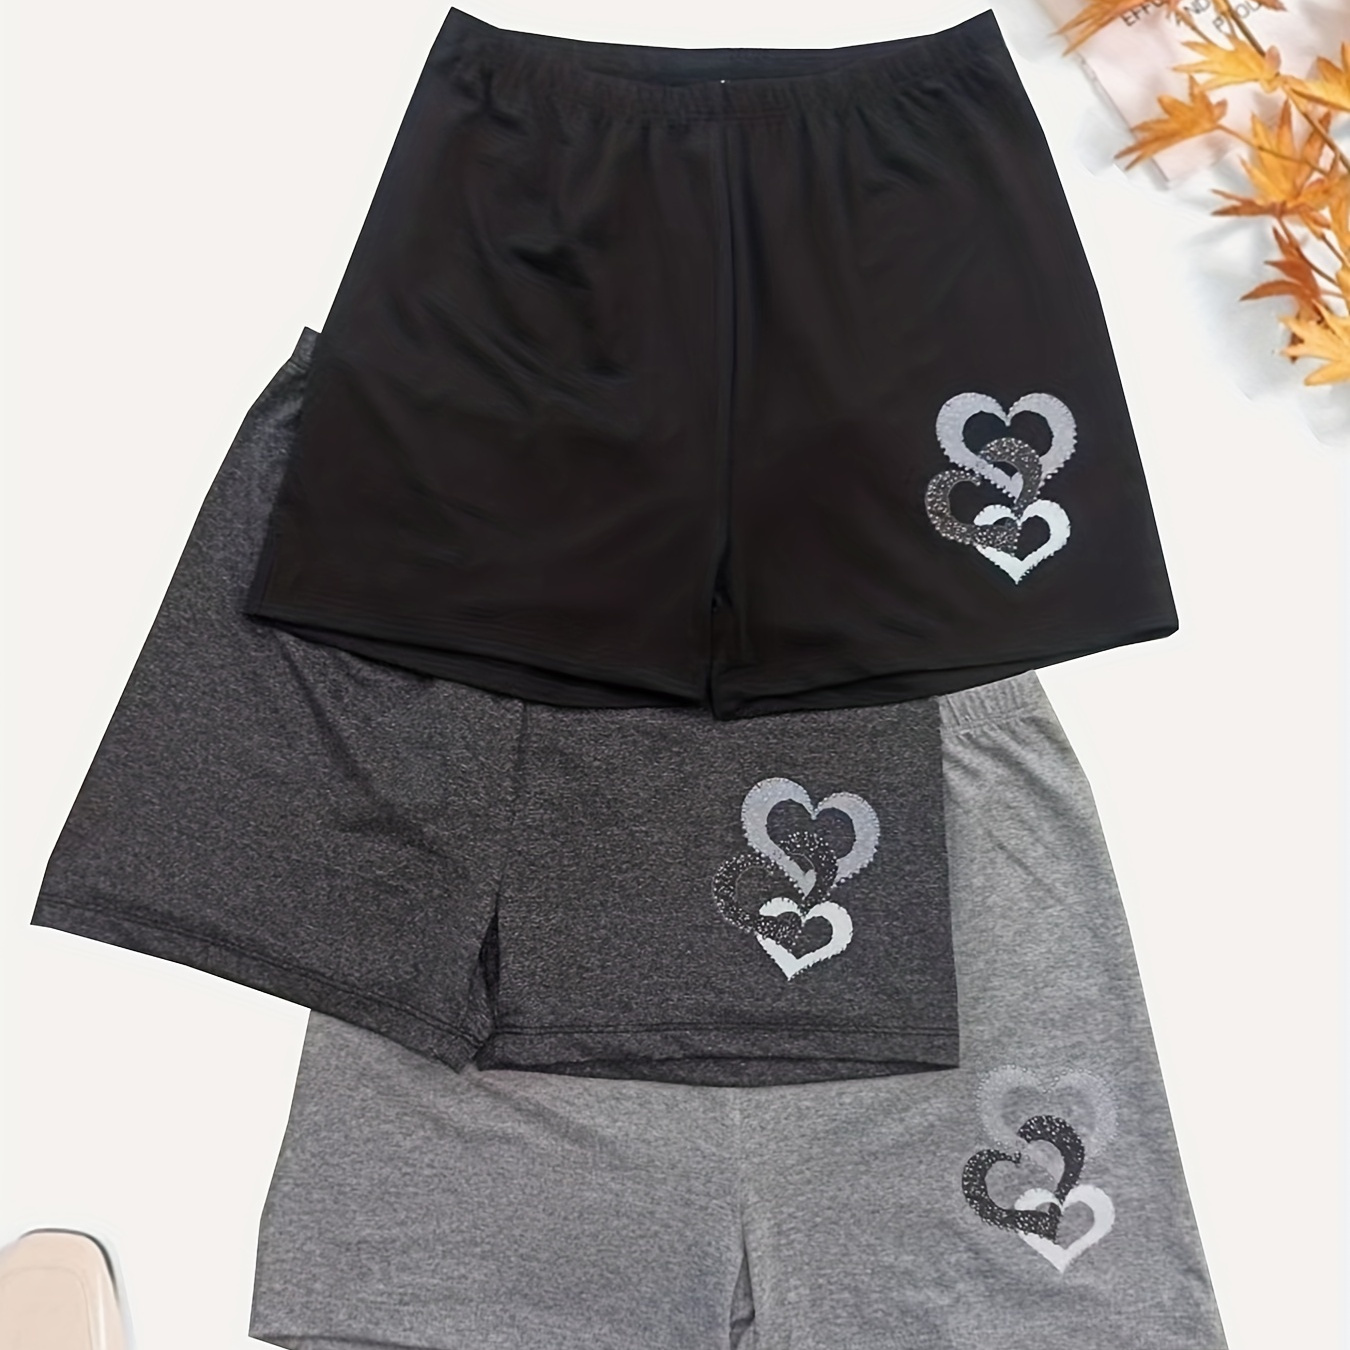 

3 Packs Heart Print Slim Shorts, Casual Shorts For Spring & Summer, Women's Clothing